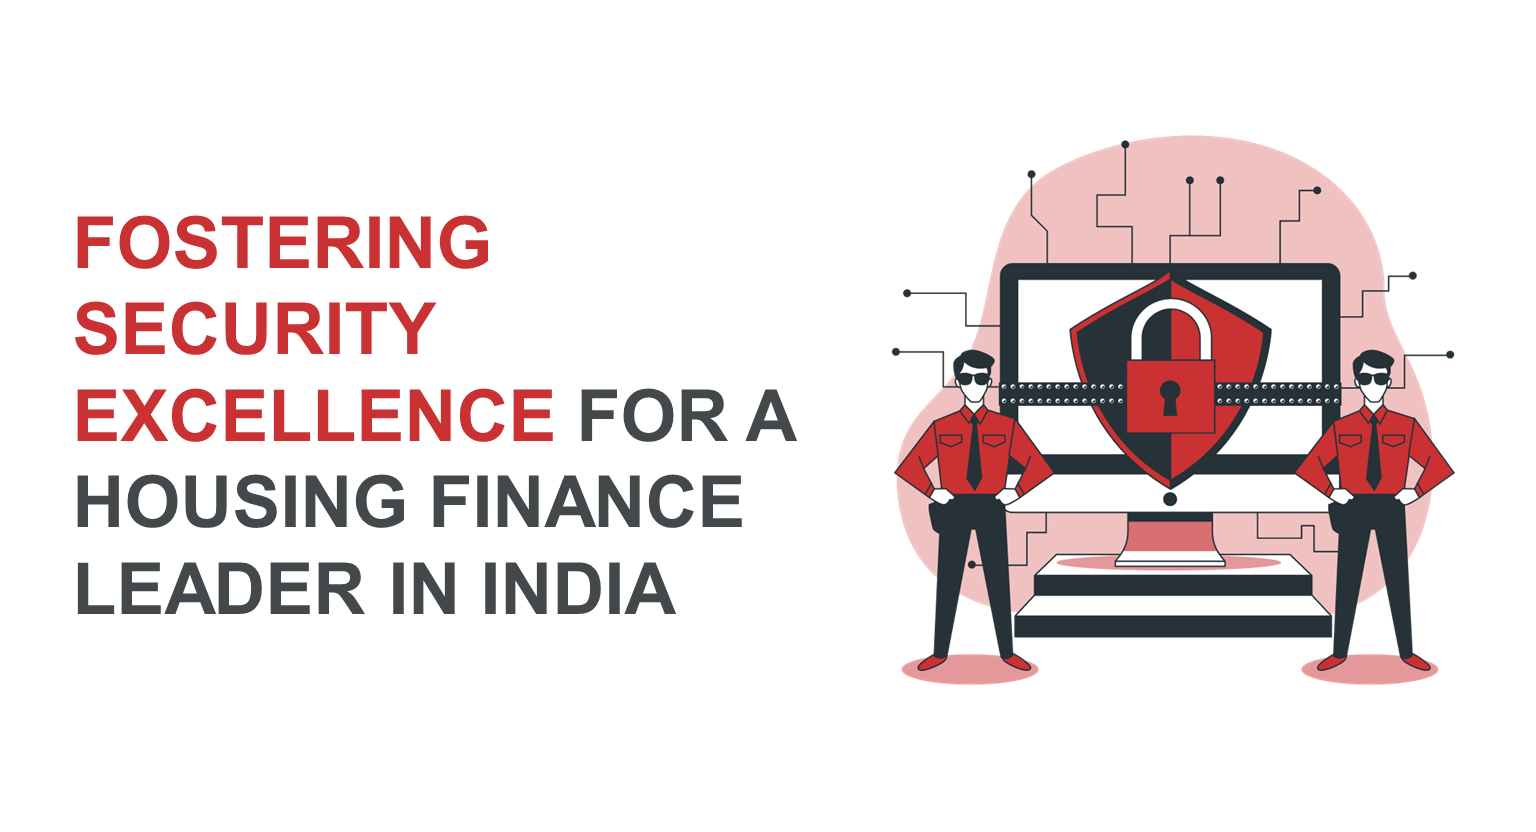 Fostering Security Excellence for a Housing Finance Leader in India